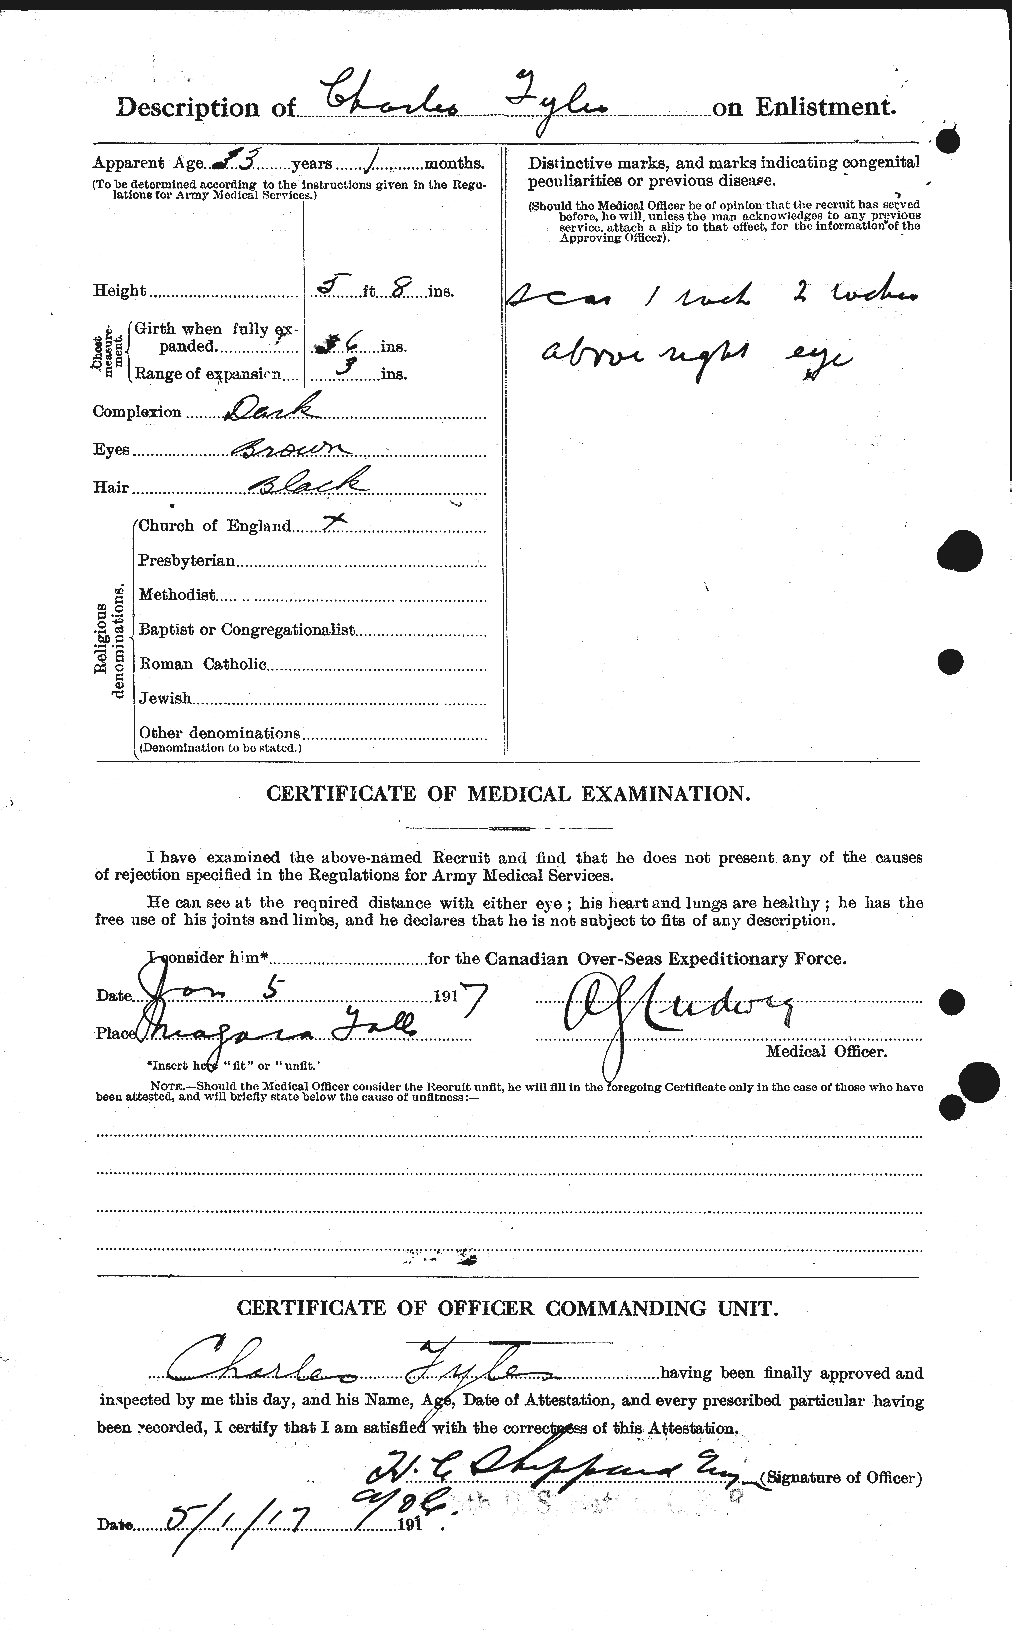 Personnel Records of the First World War - CEF 338873b